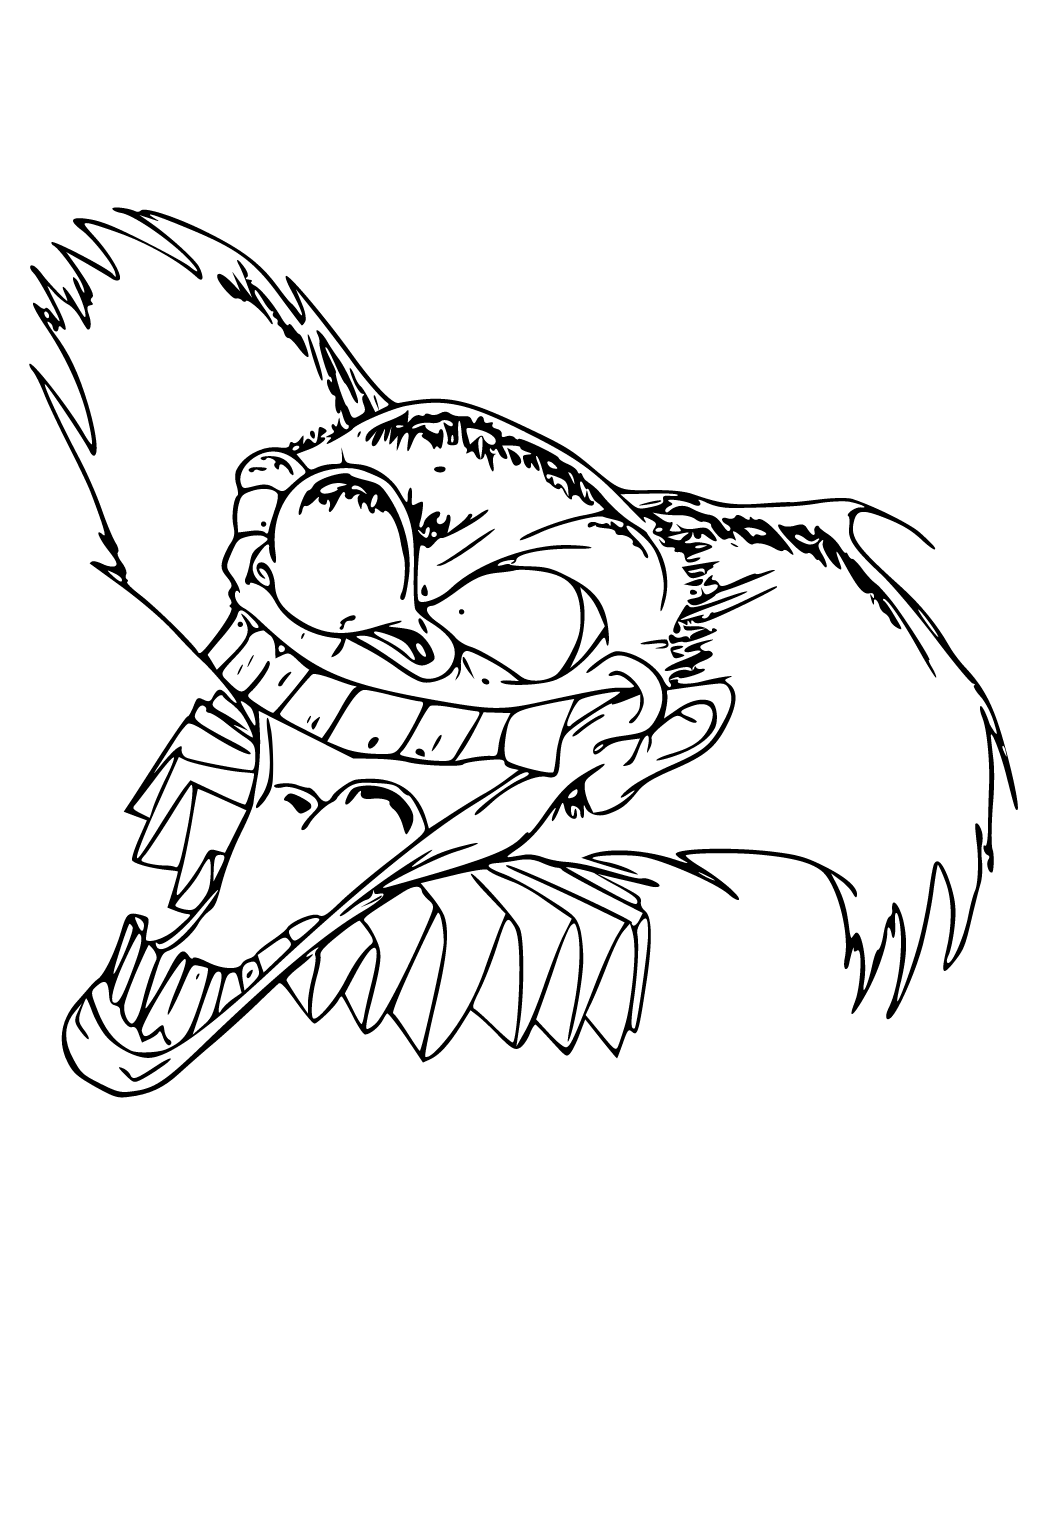 Creepy Siren Head Coloring Page - Free Printable Coloring Pages for Kids